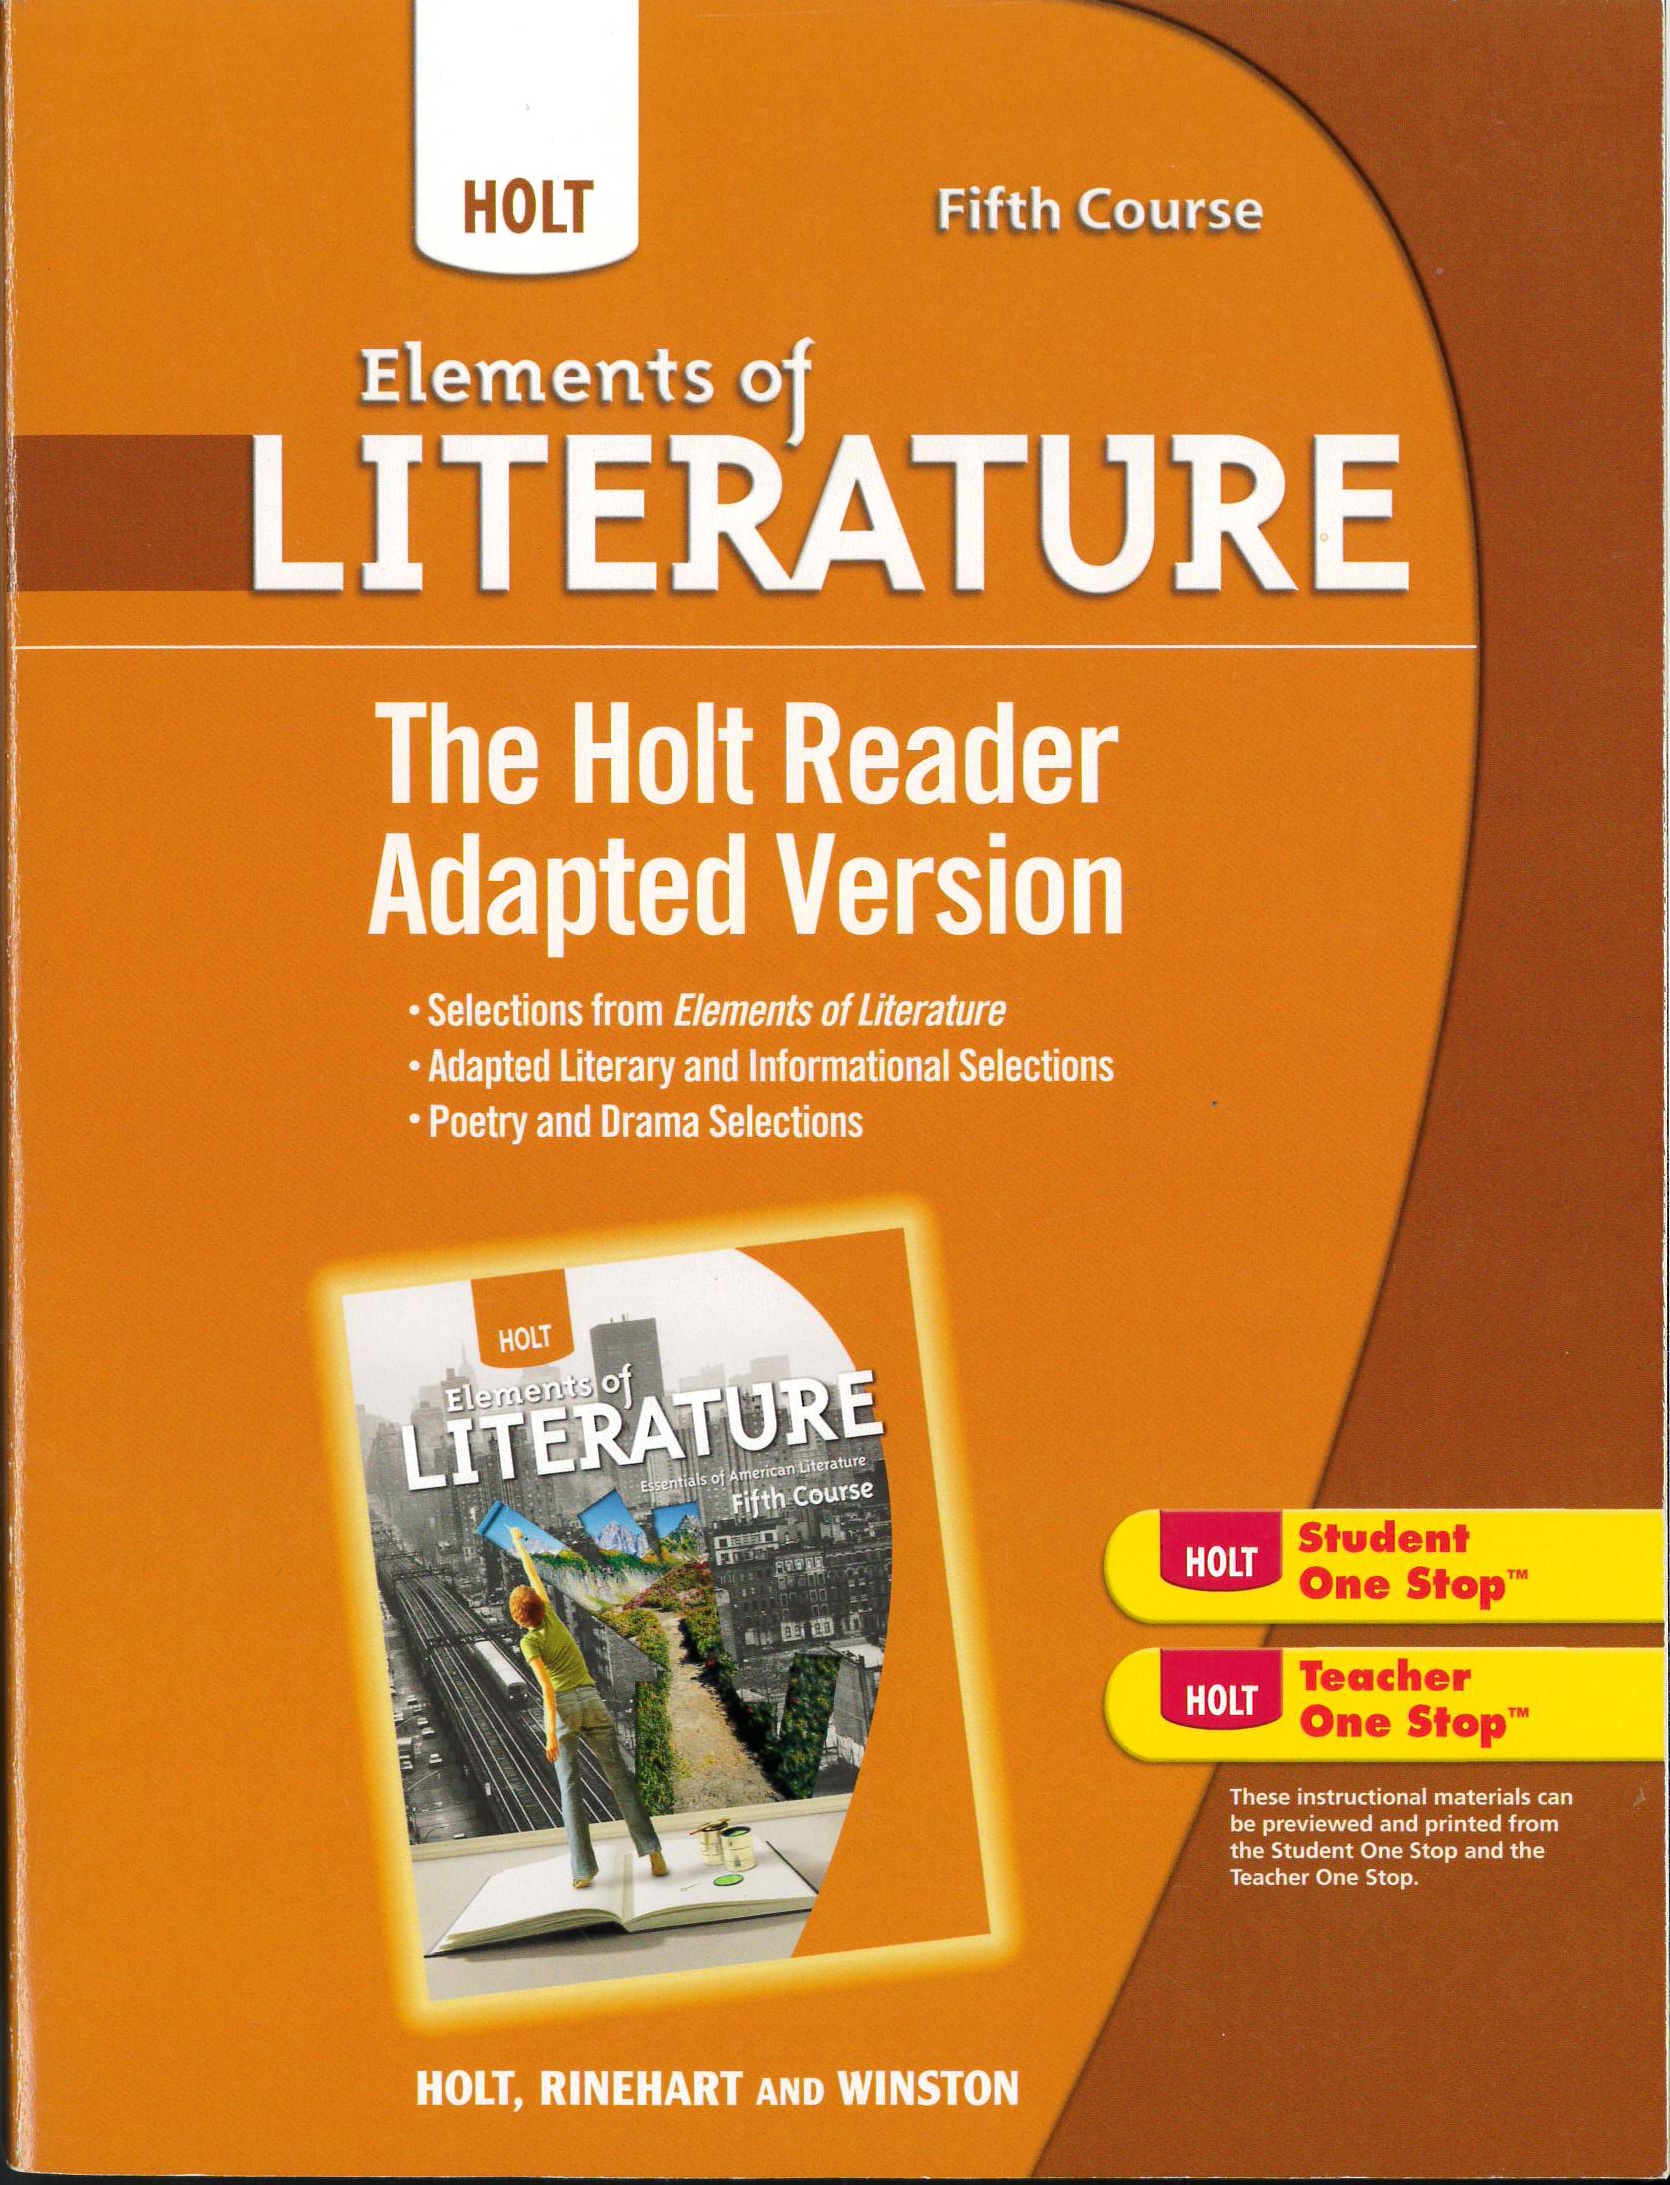 The holt reader, adapted version [Fifth Course]